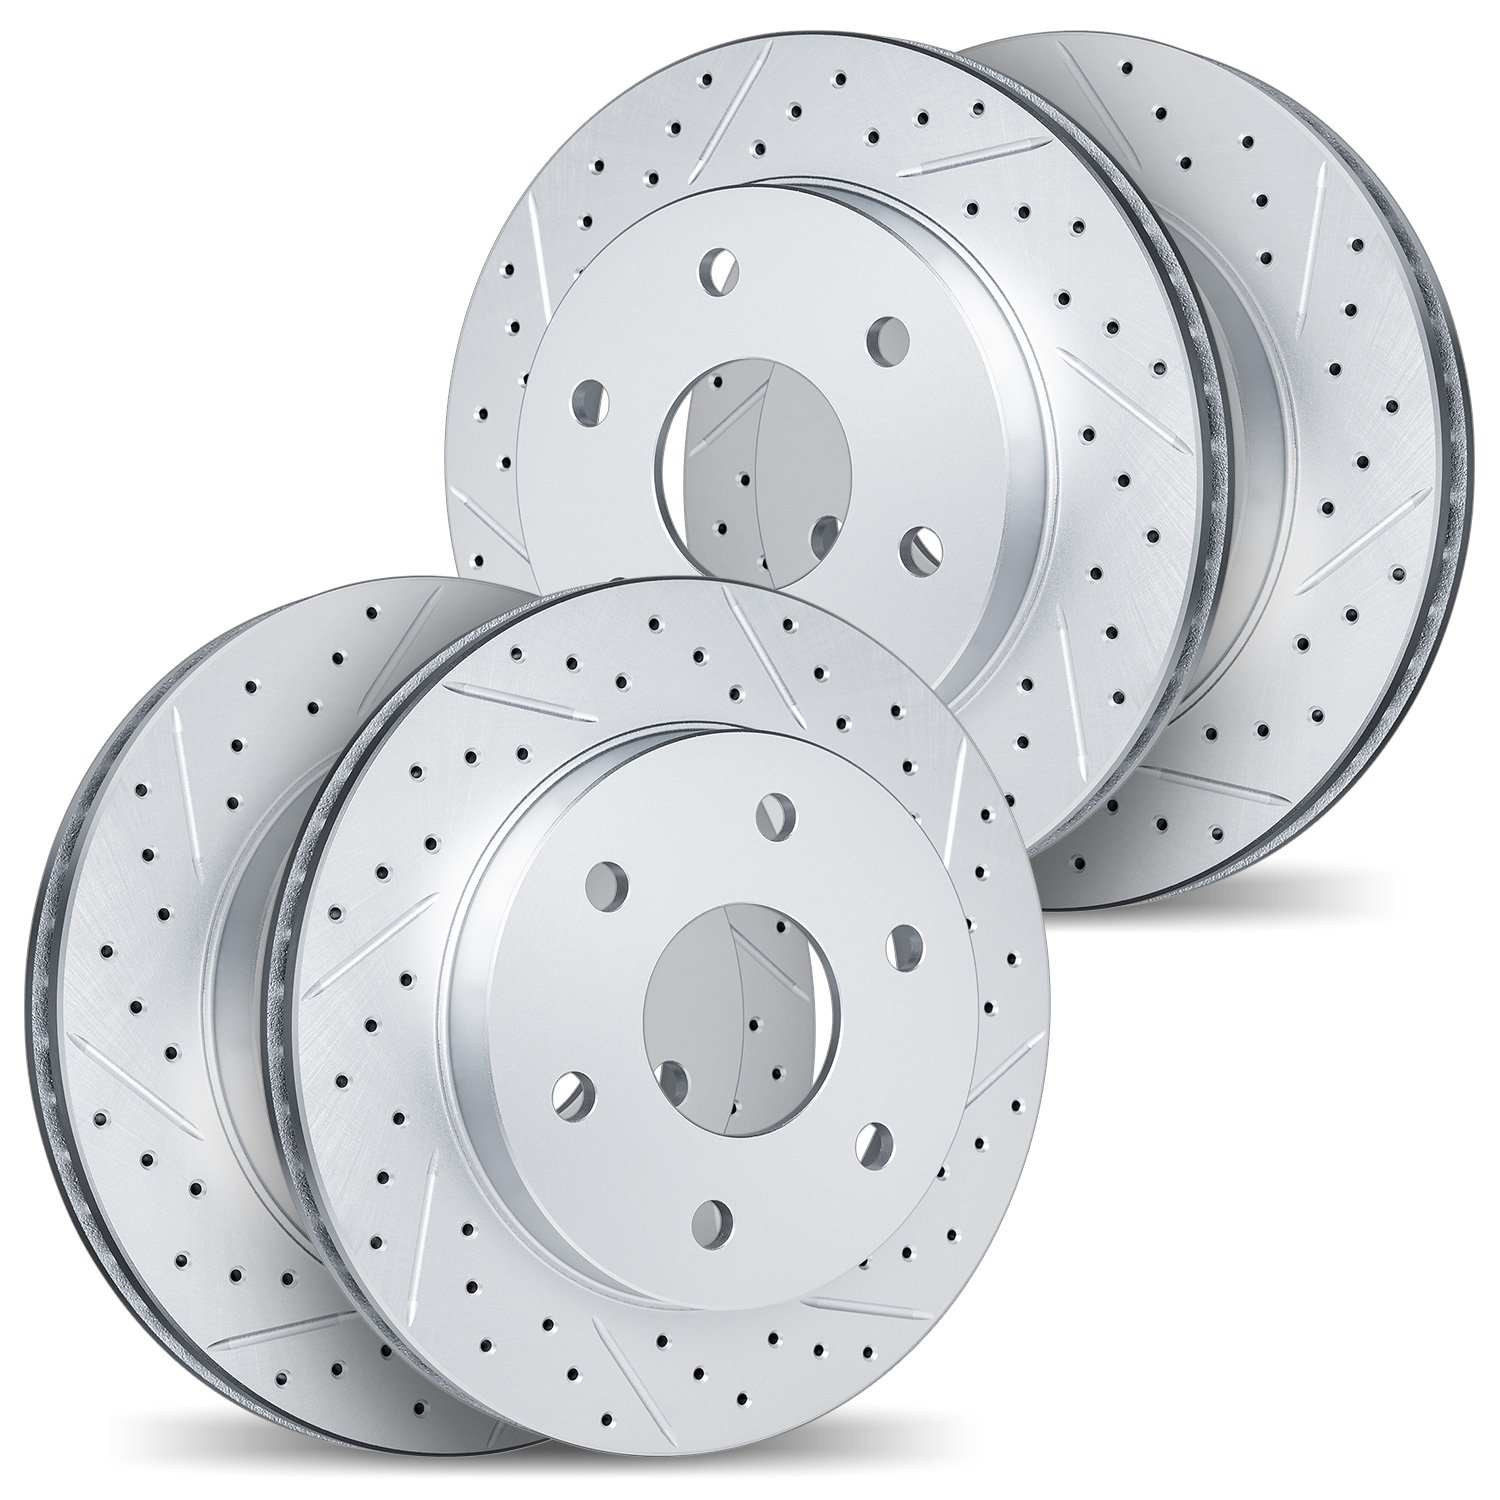 2004-47052 Geoperformance Drilled/Slotted Brake Rotors, Fits Select GM, Position: Front and Rear